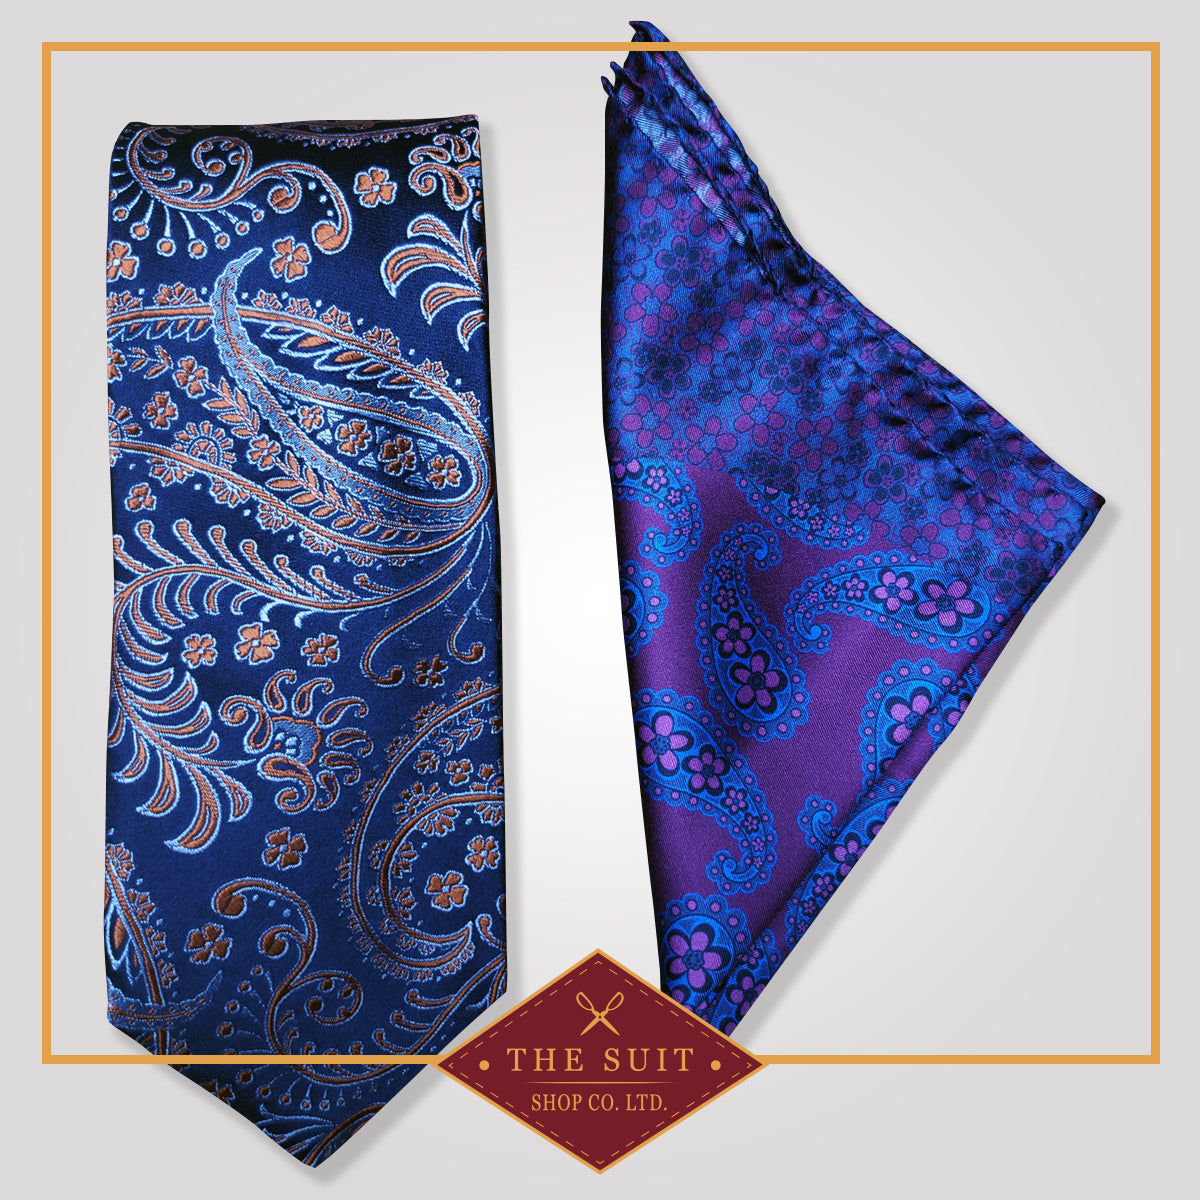 Downriver Patterned Tie and Bay of Many Pocket Square